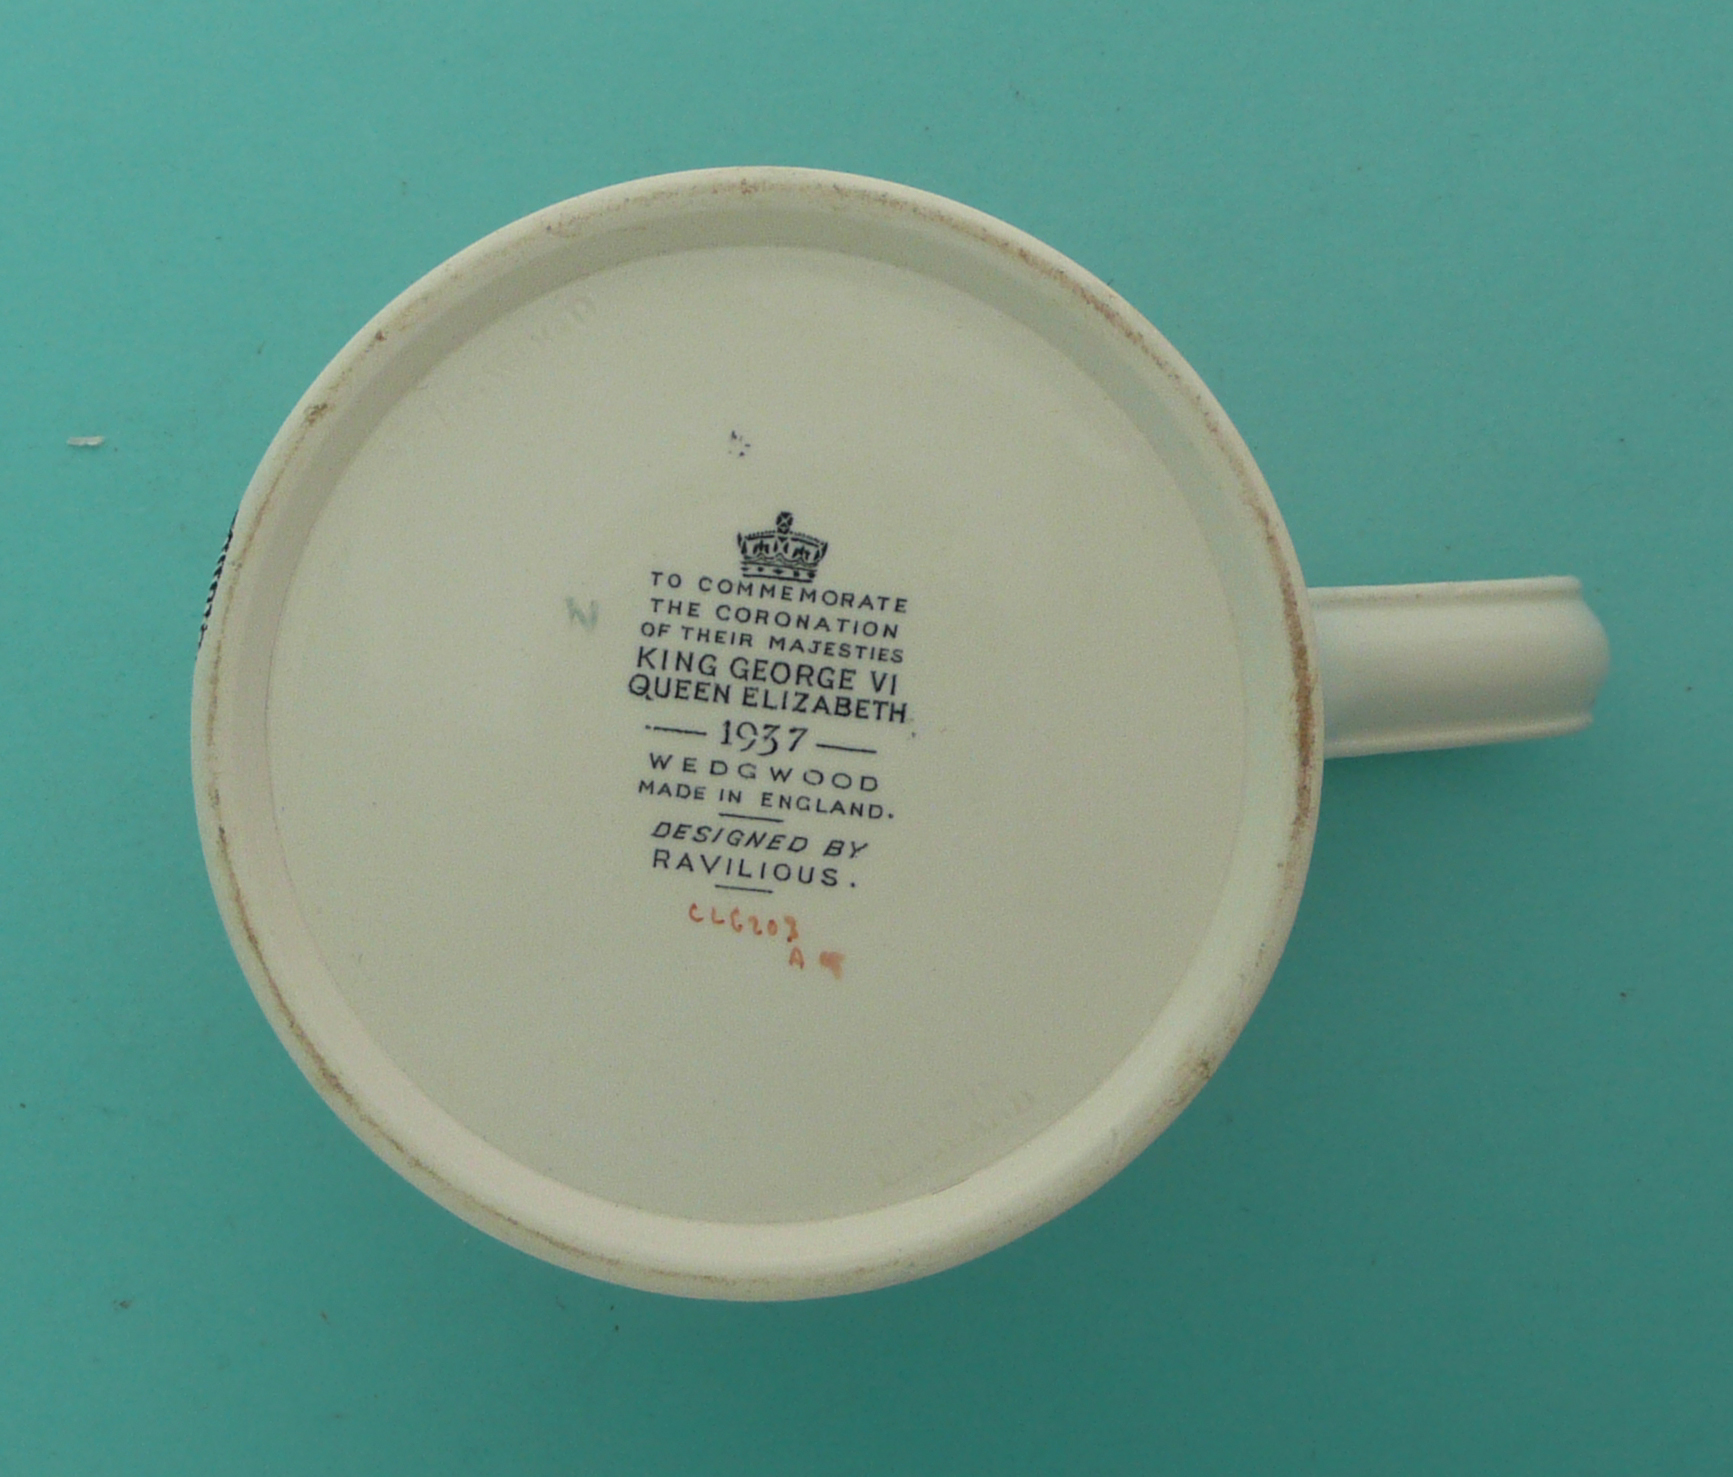 1937 Coronation: a good stylish mug designed by Ravilious for Wedgwood, printed in black and - Image 6 of 6